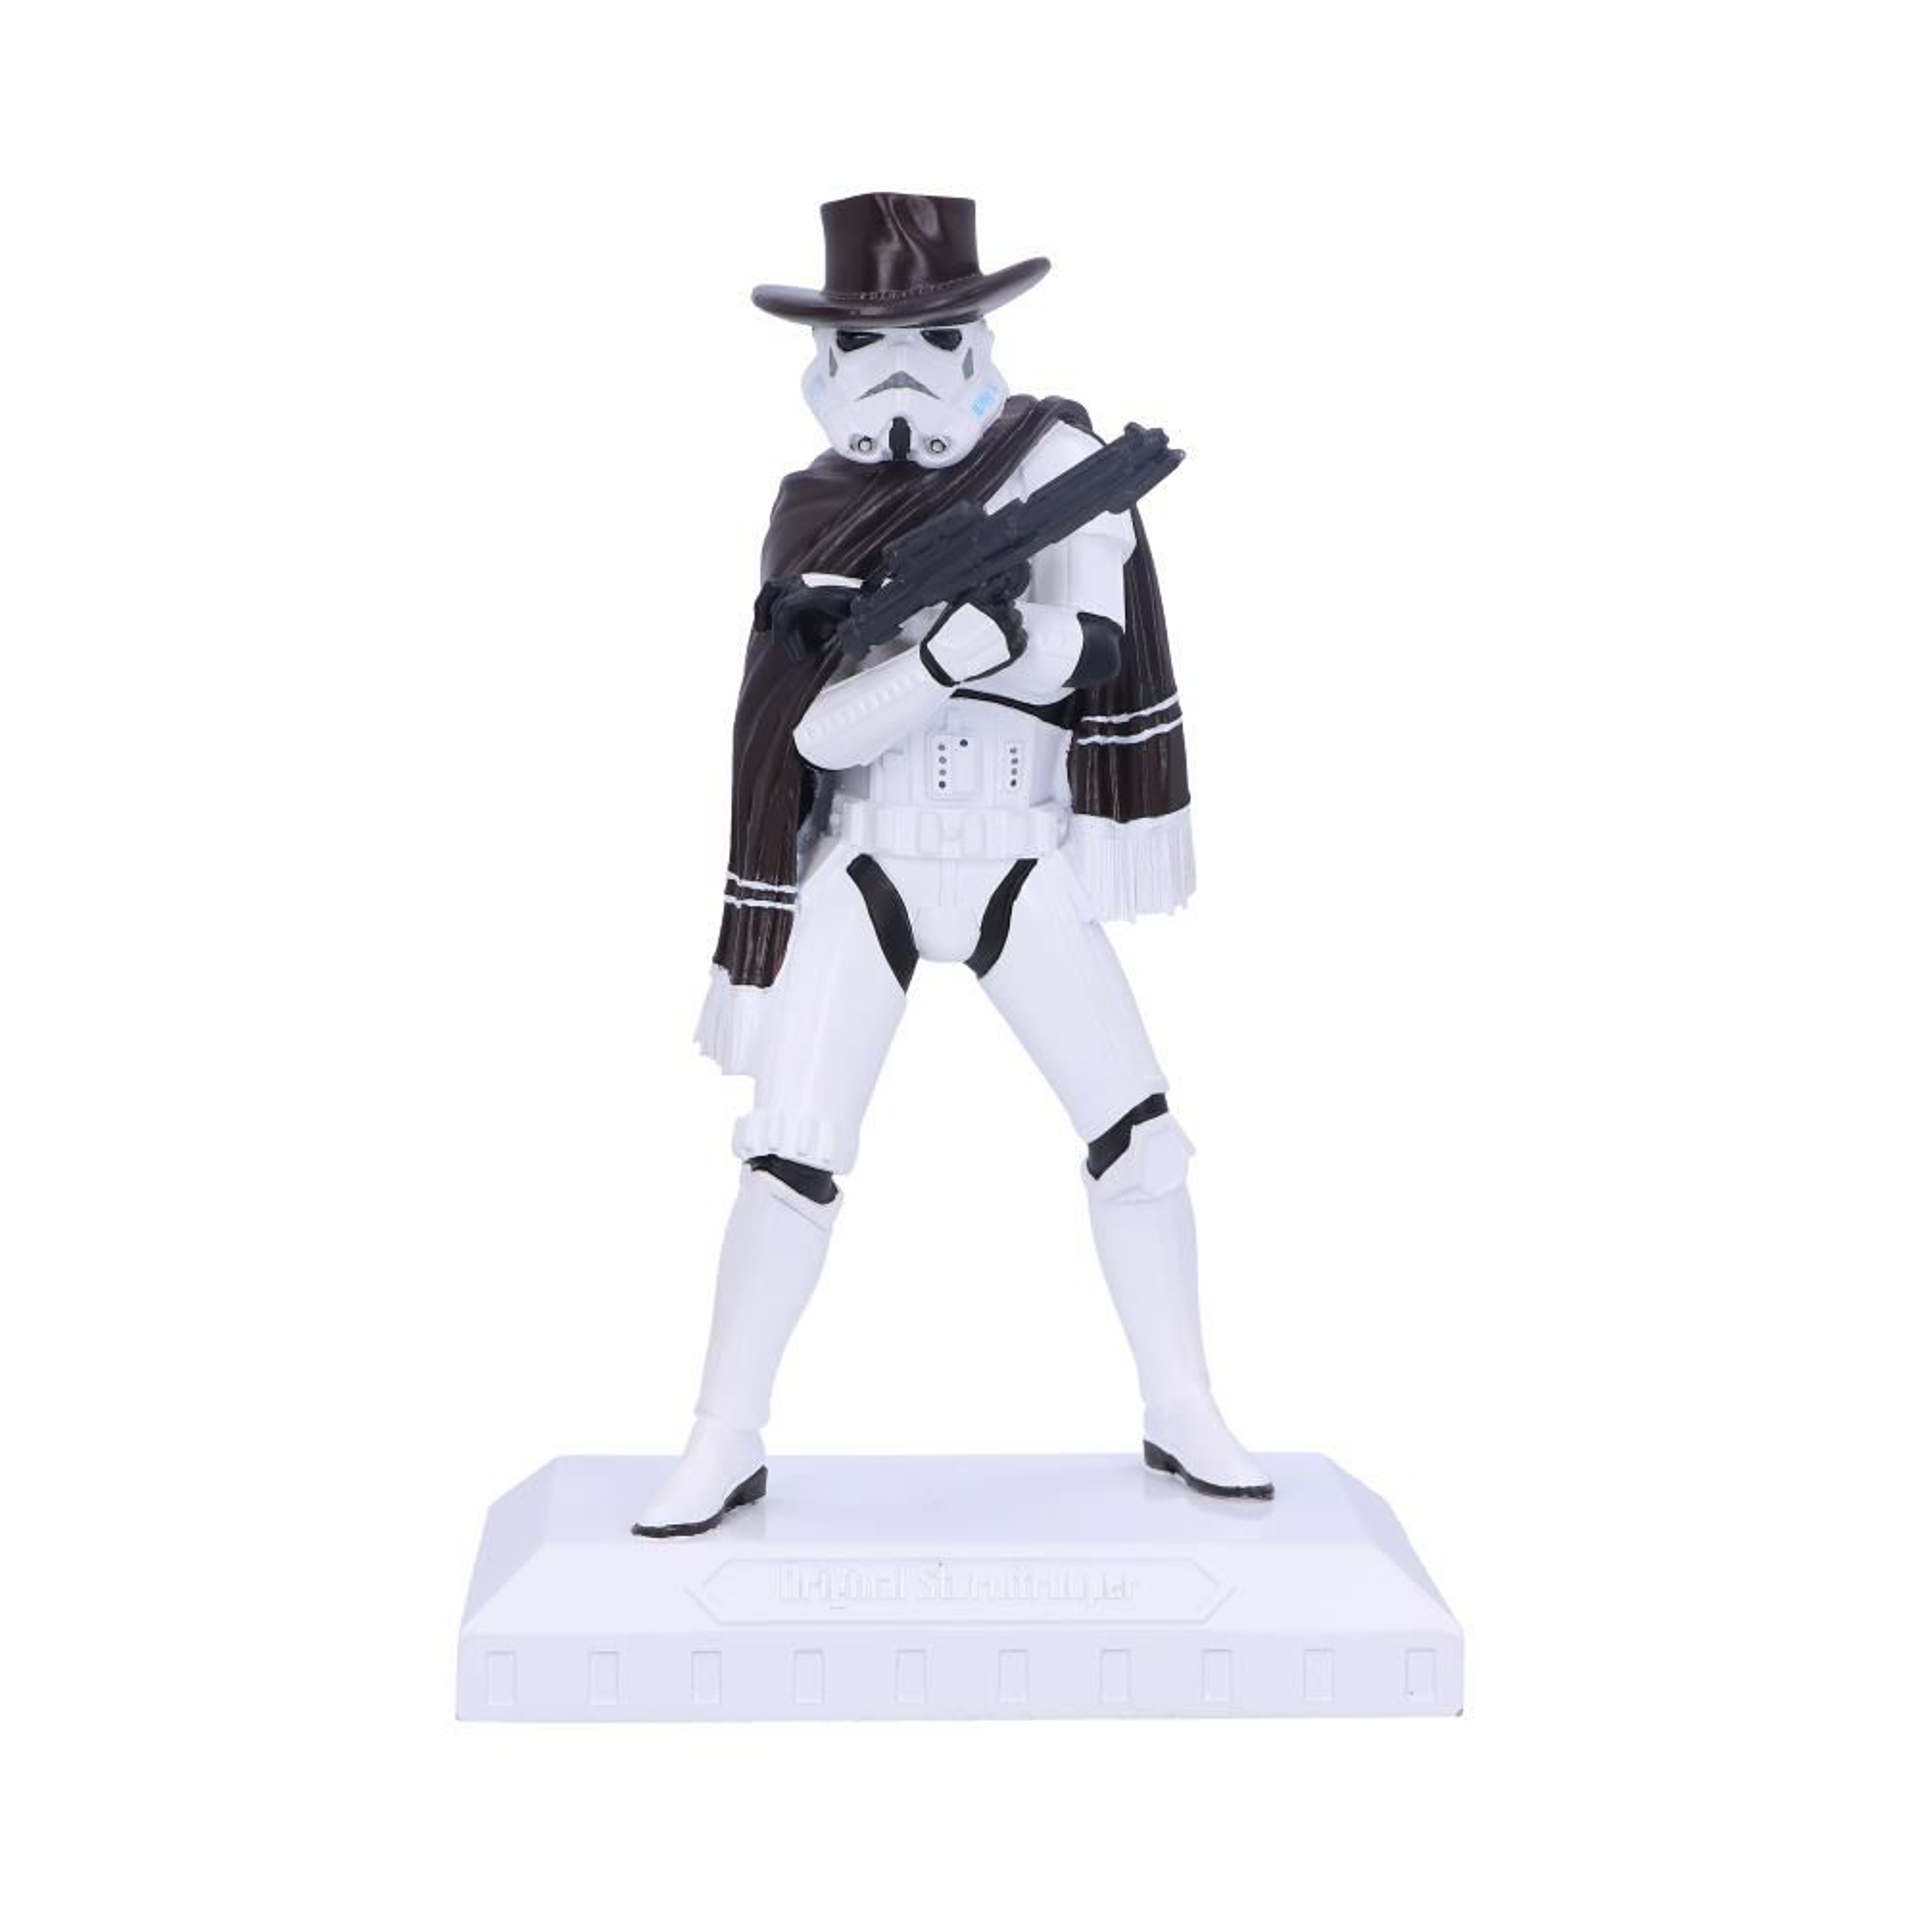 Star Wars - Figurine Stormtrooper \"The Good,The Bad and The Troo